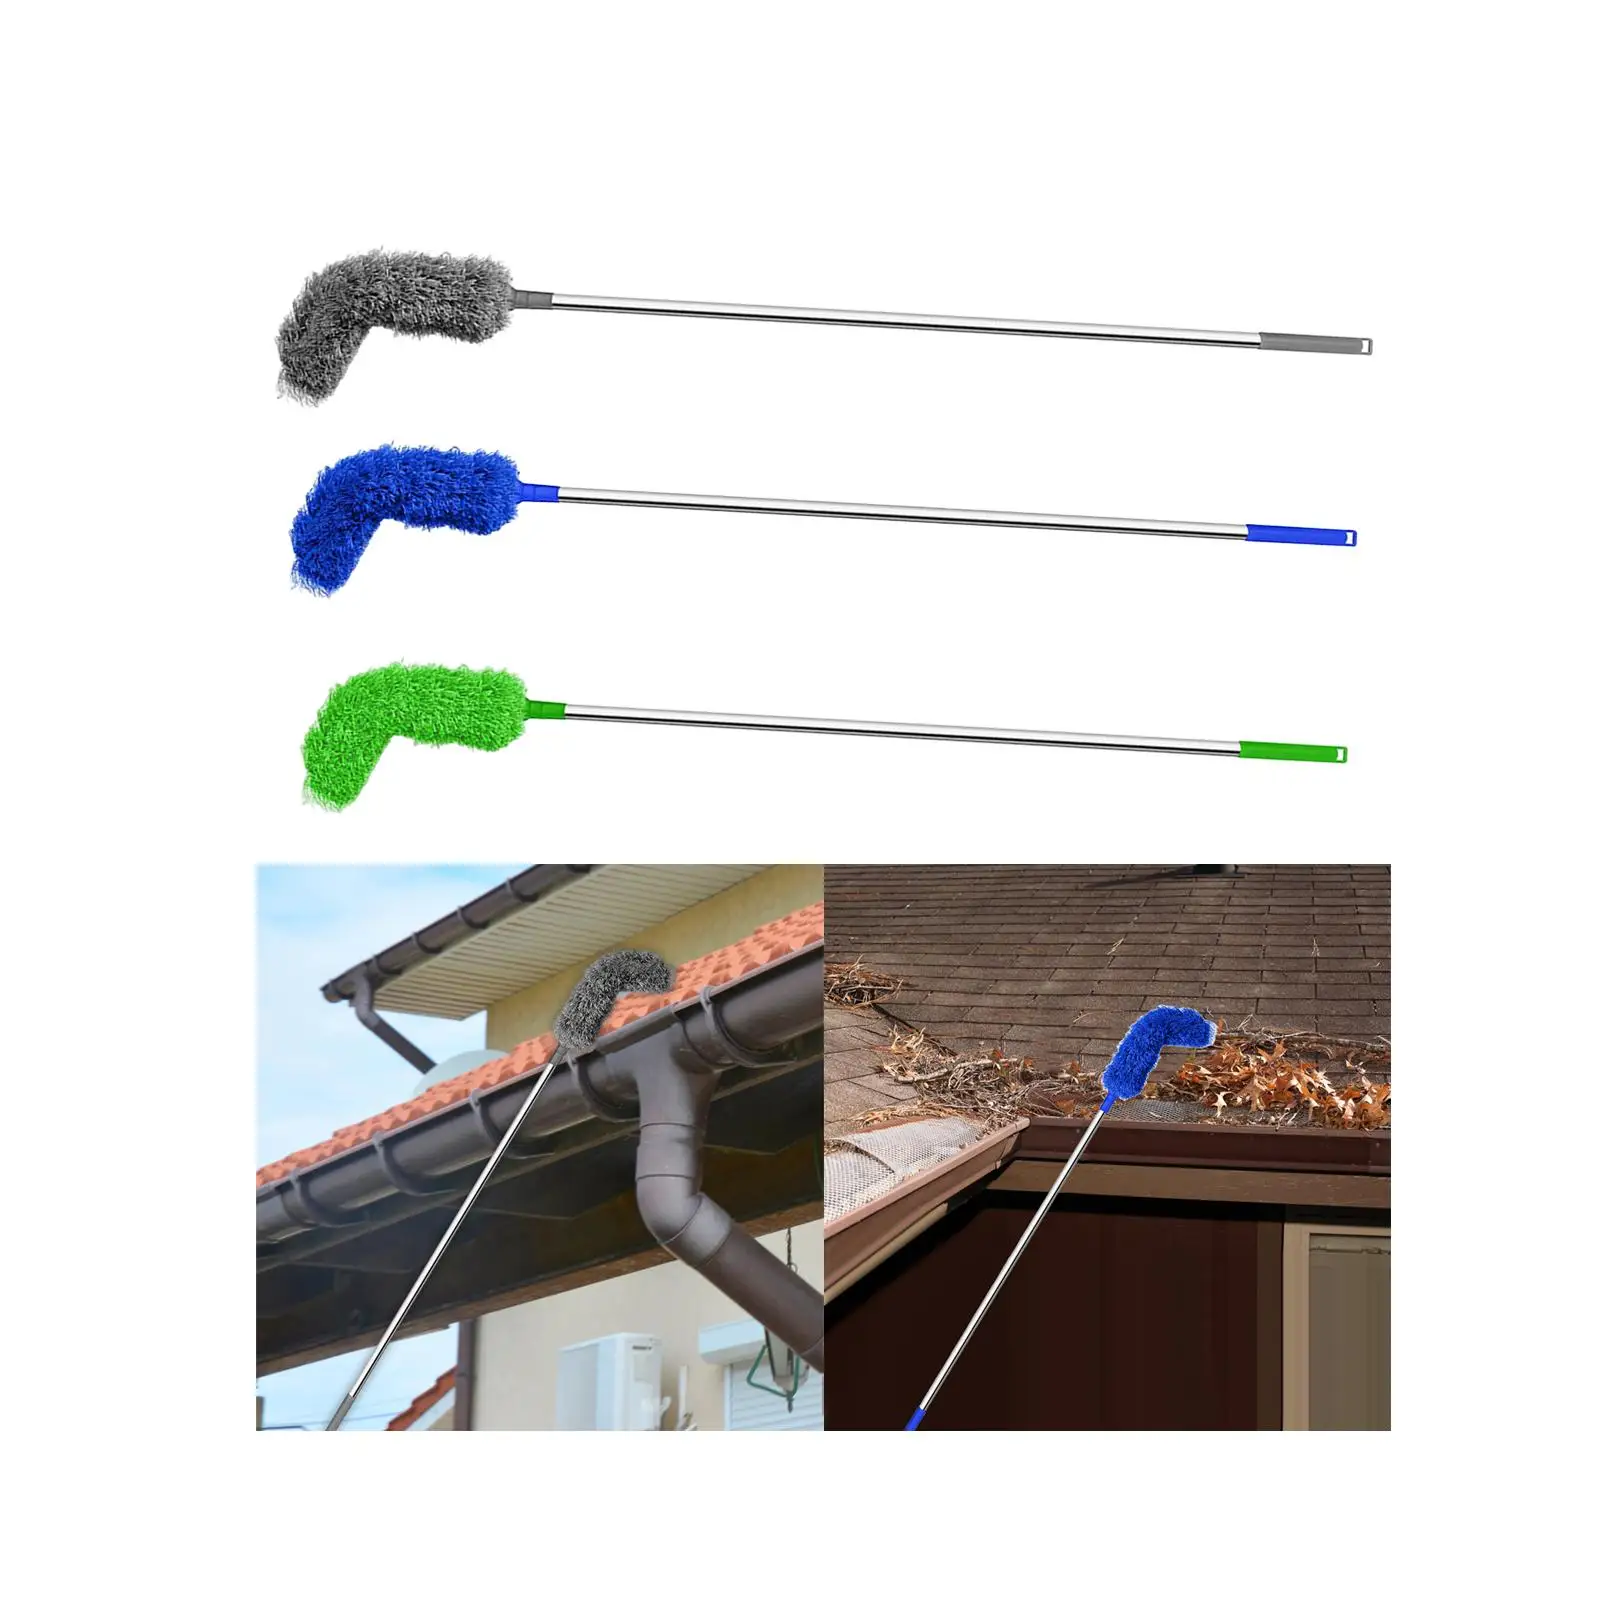 Gutter Cleaning Brush Telescopic Pole 45cm to 220cm Sturdy Durable Strong Cleaning The Leaves, Debris and Twigs of Gutters